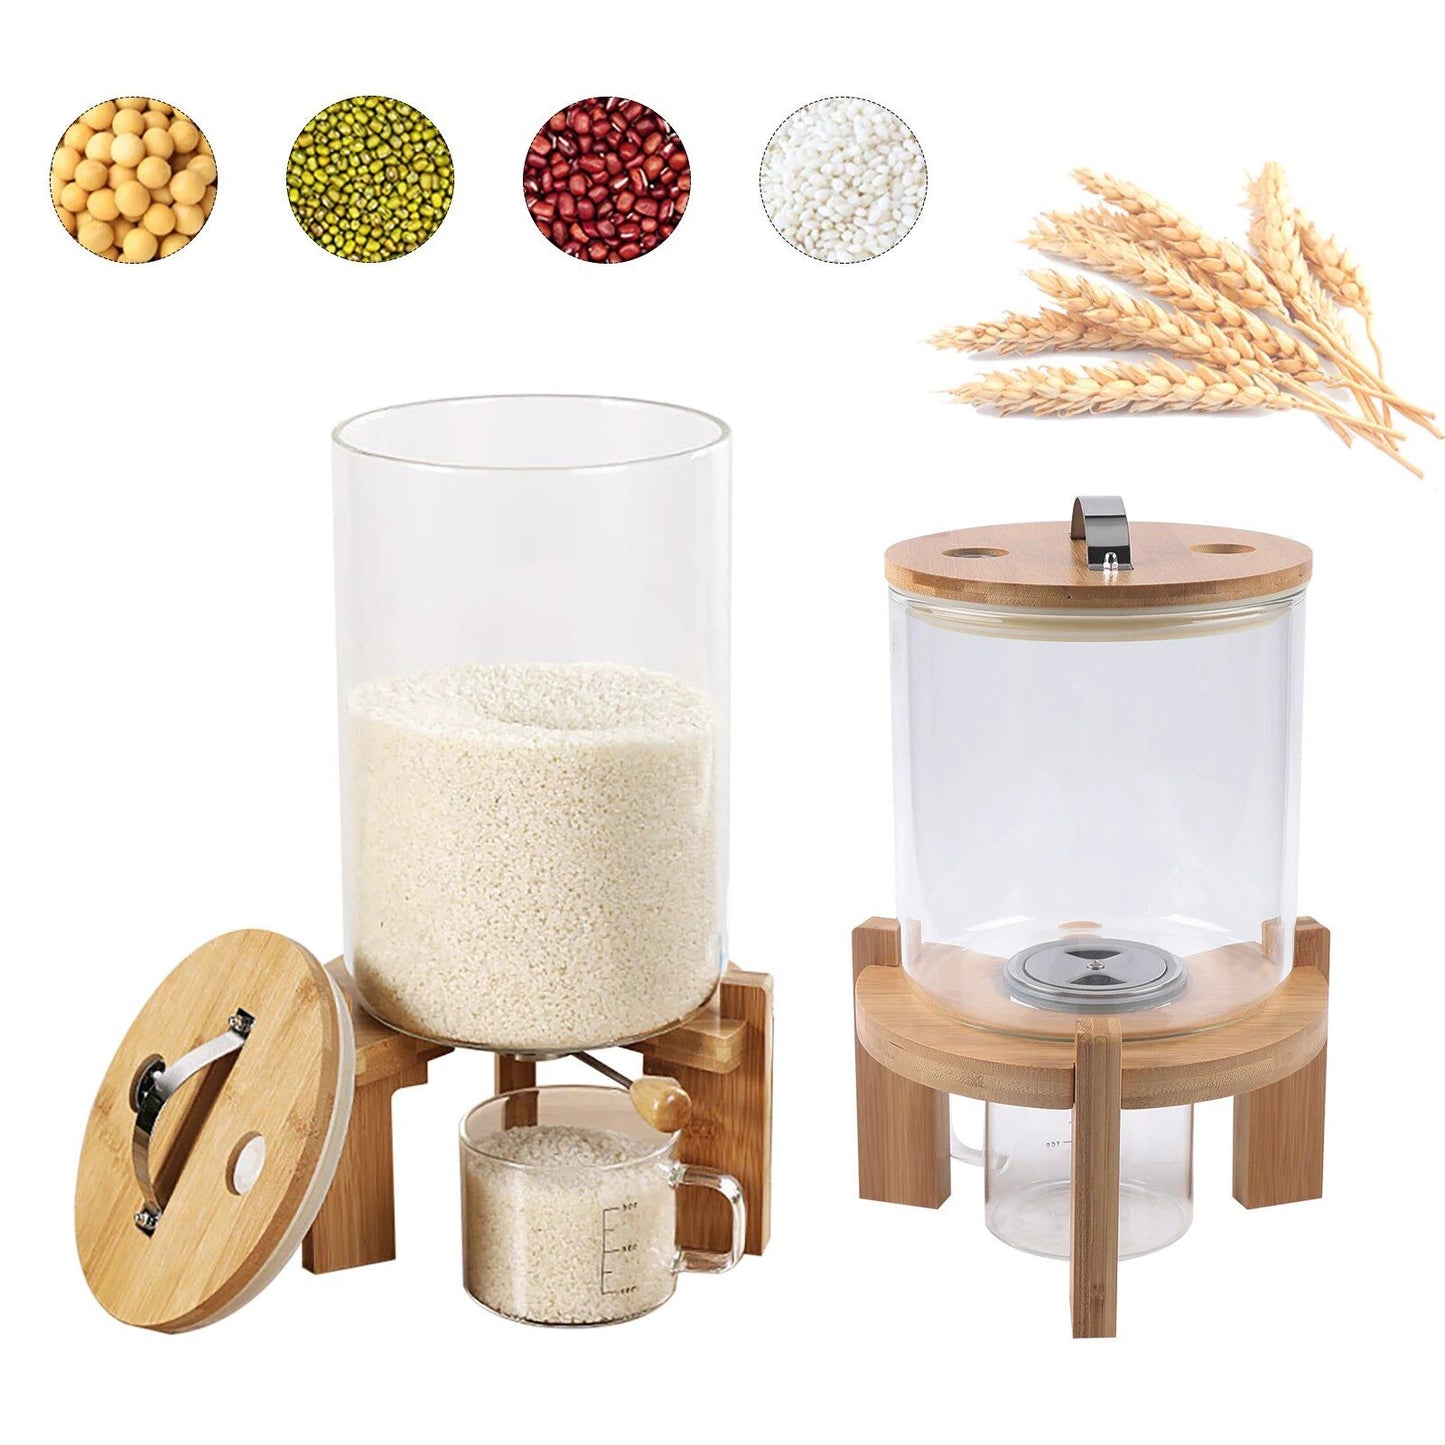 Modern Glass and Bamboo Food Storage Dispenser for Kitchen Organization - 5L/7.5L Capacity